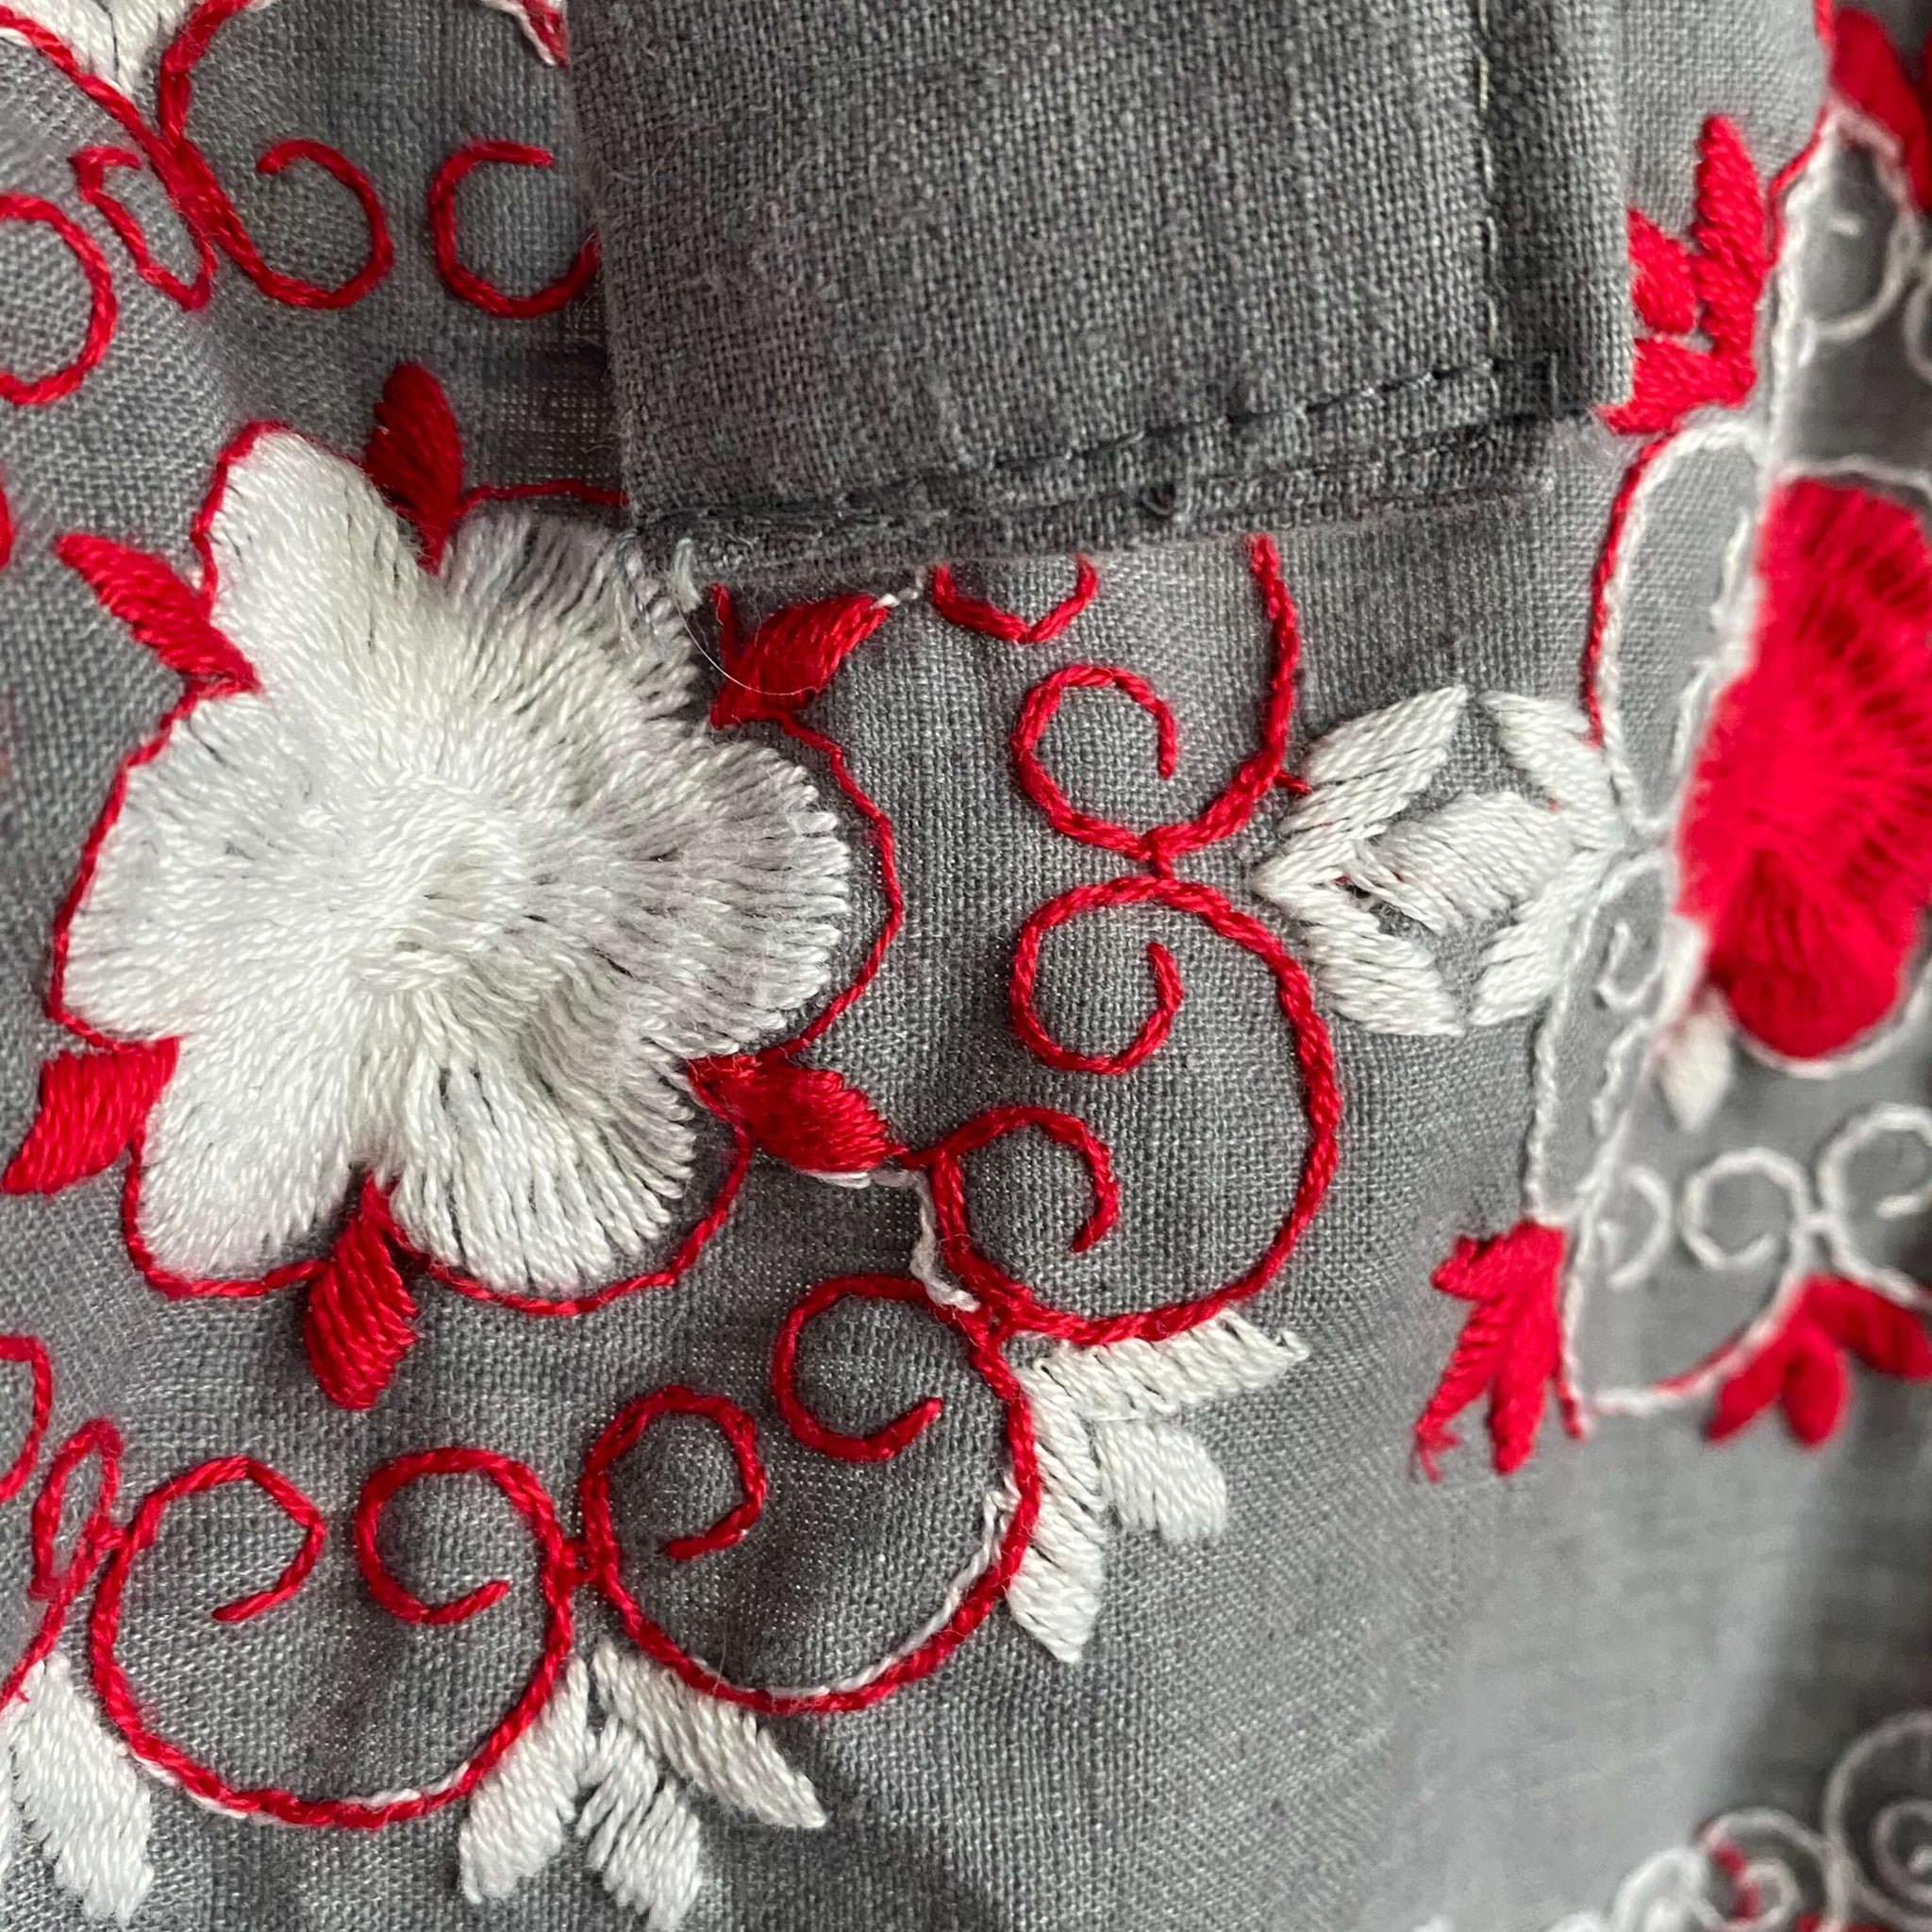 Gray Half Apron with Red and White Embroidery - Scandinavian Style